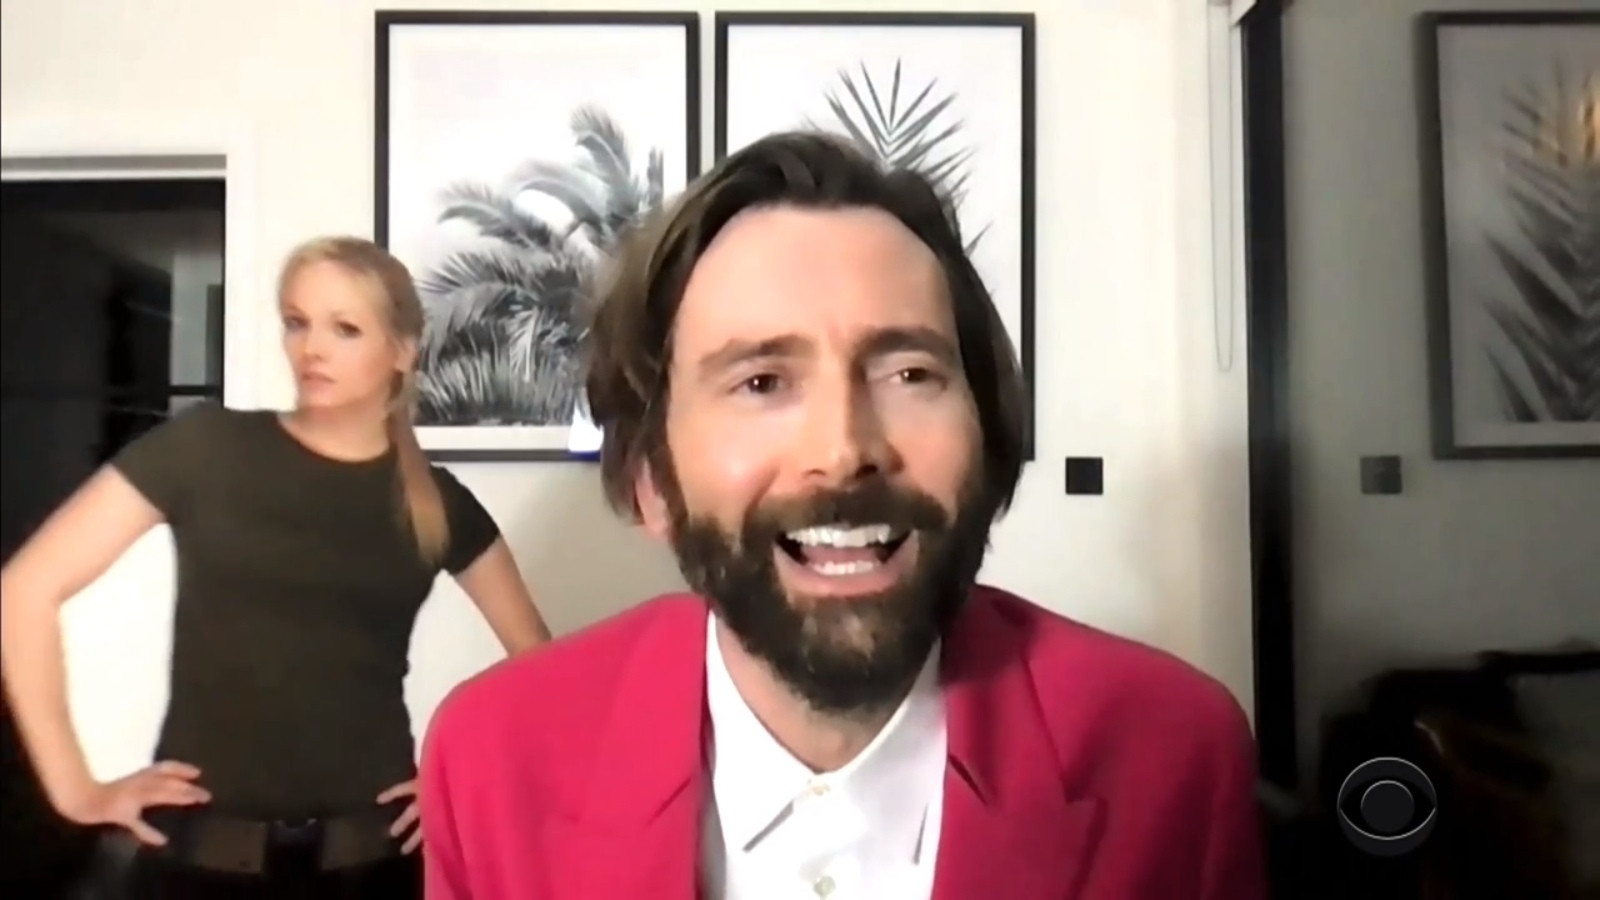 The best gift for husband - David Tennant, Georgia Tennant, Actors and actresses, Celebrities, Storyboard, Presents, The 14th of February, Wife, , Husband, From the network, Humor, James Corden, Underpants, Longpost, February 14 - Valentine's Day